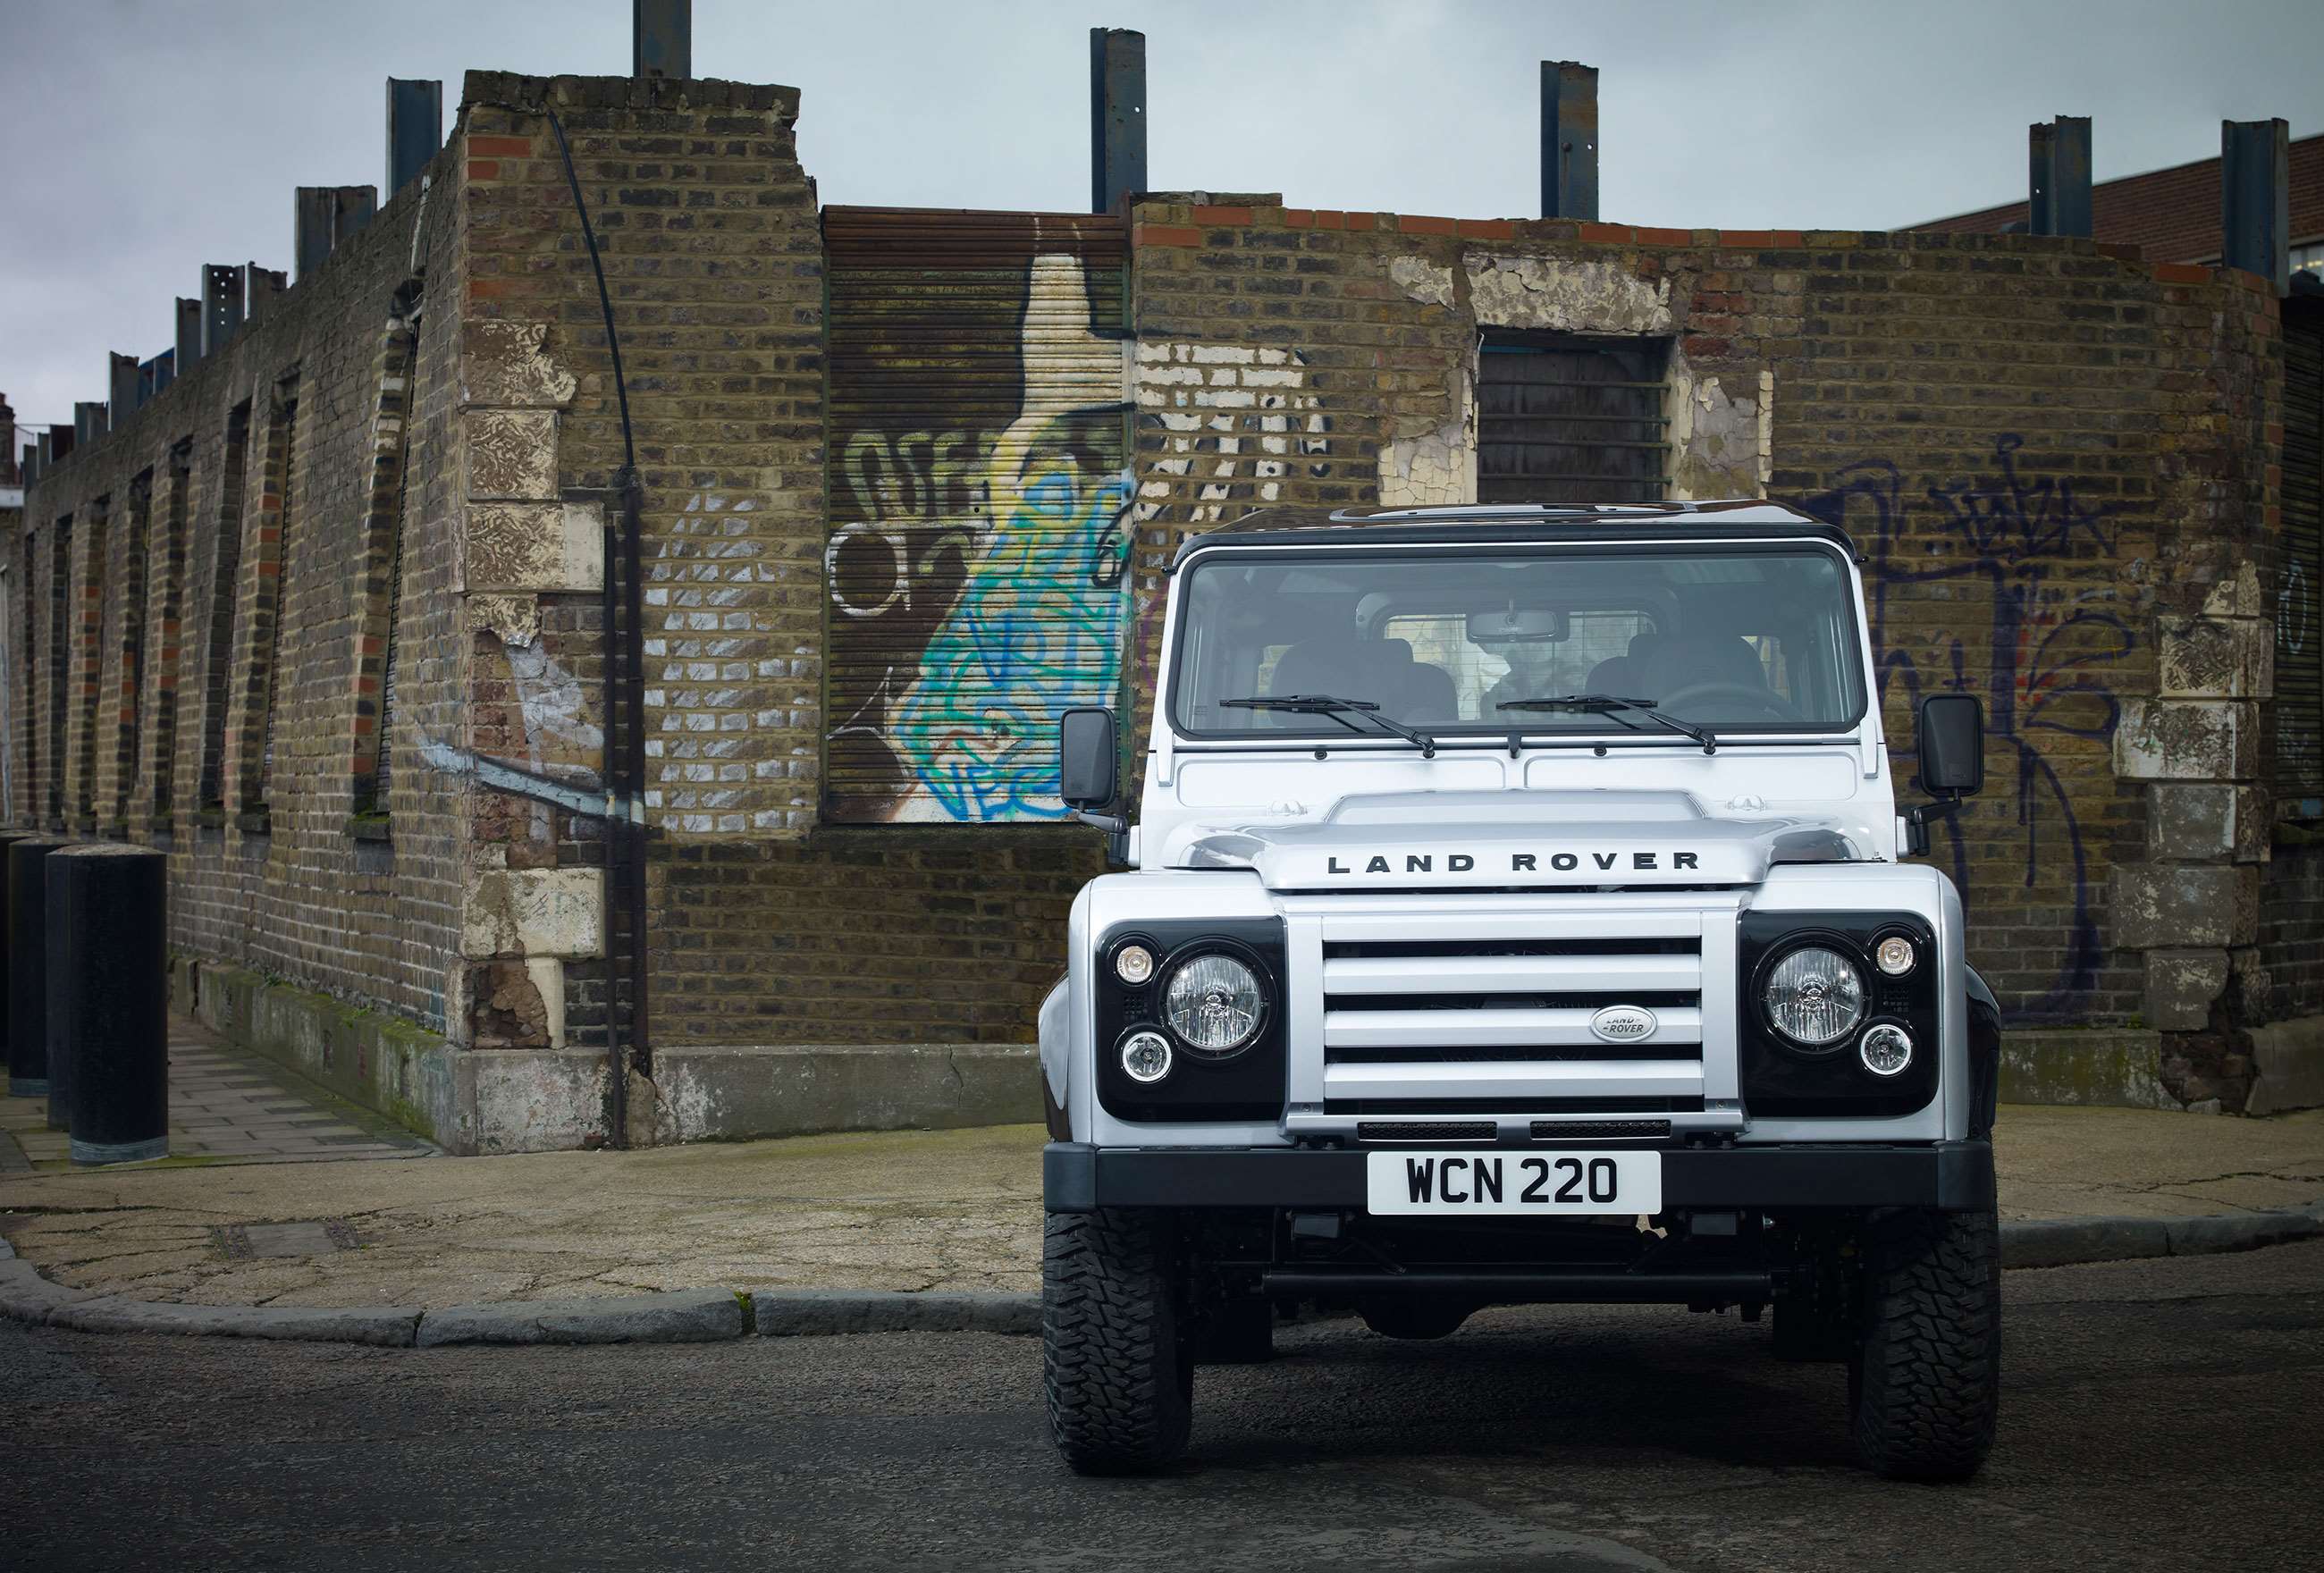 most-overrated-cars-4-land-rover-defender-goodwood-12082021.jpg